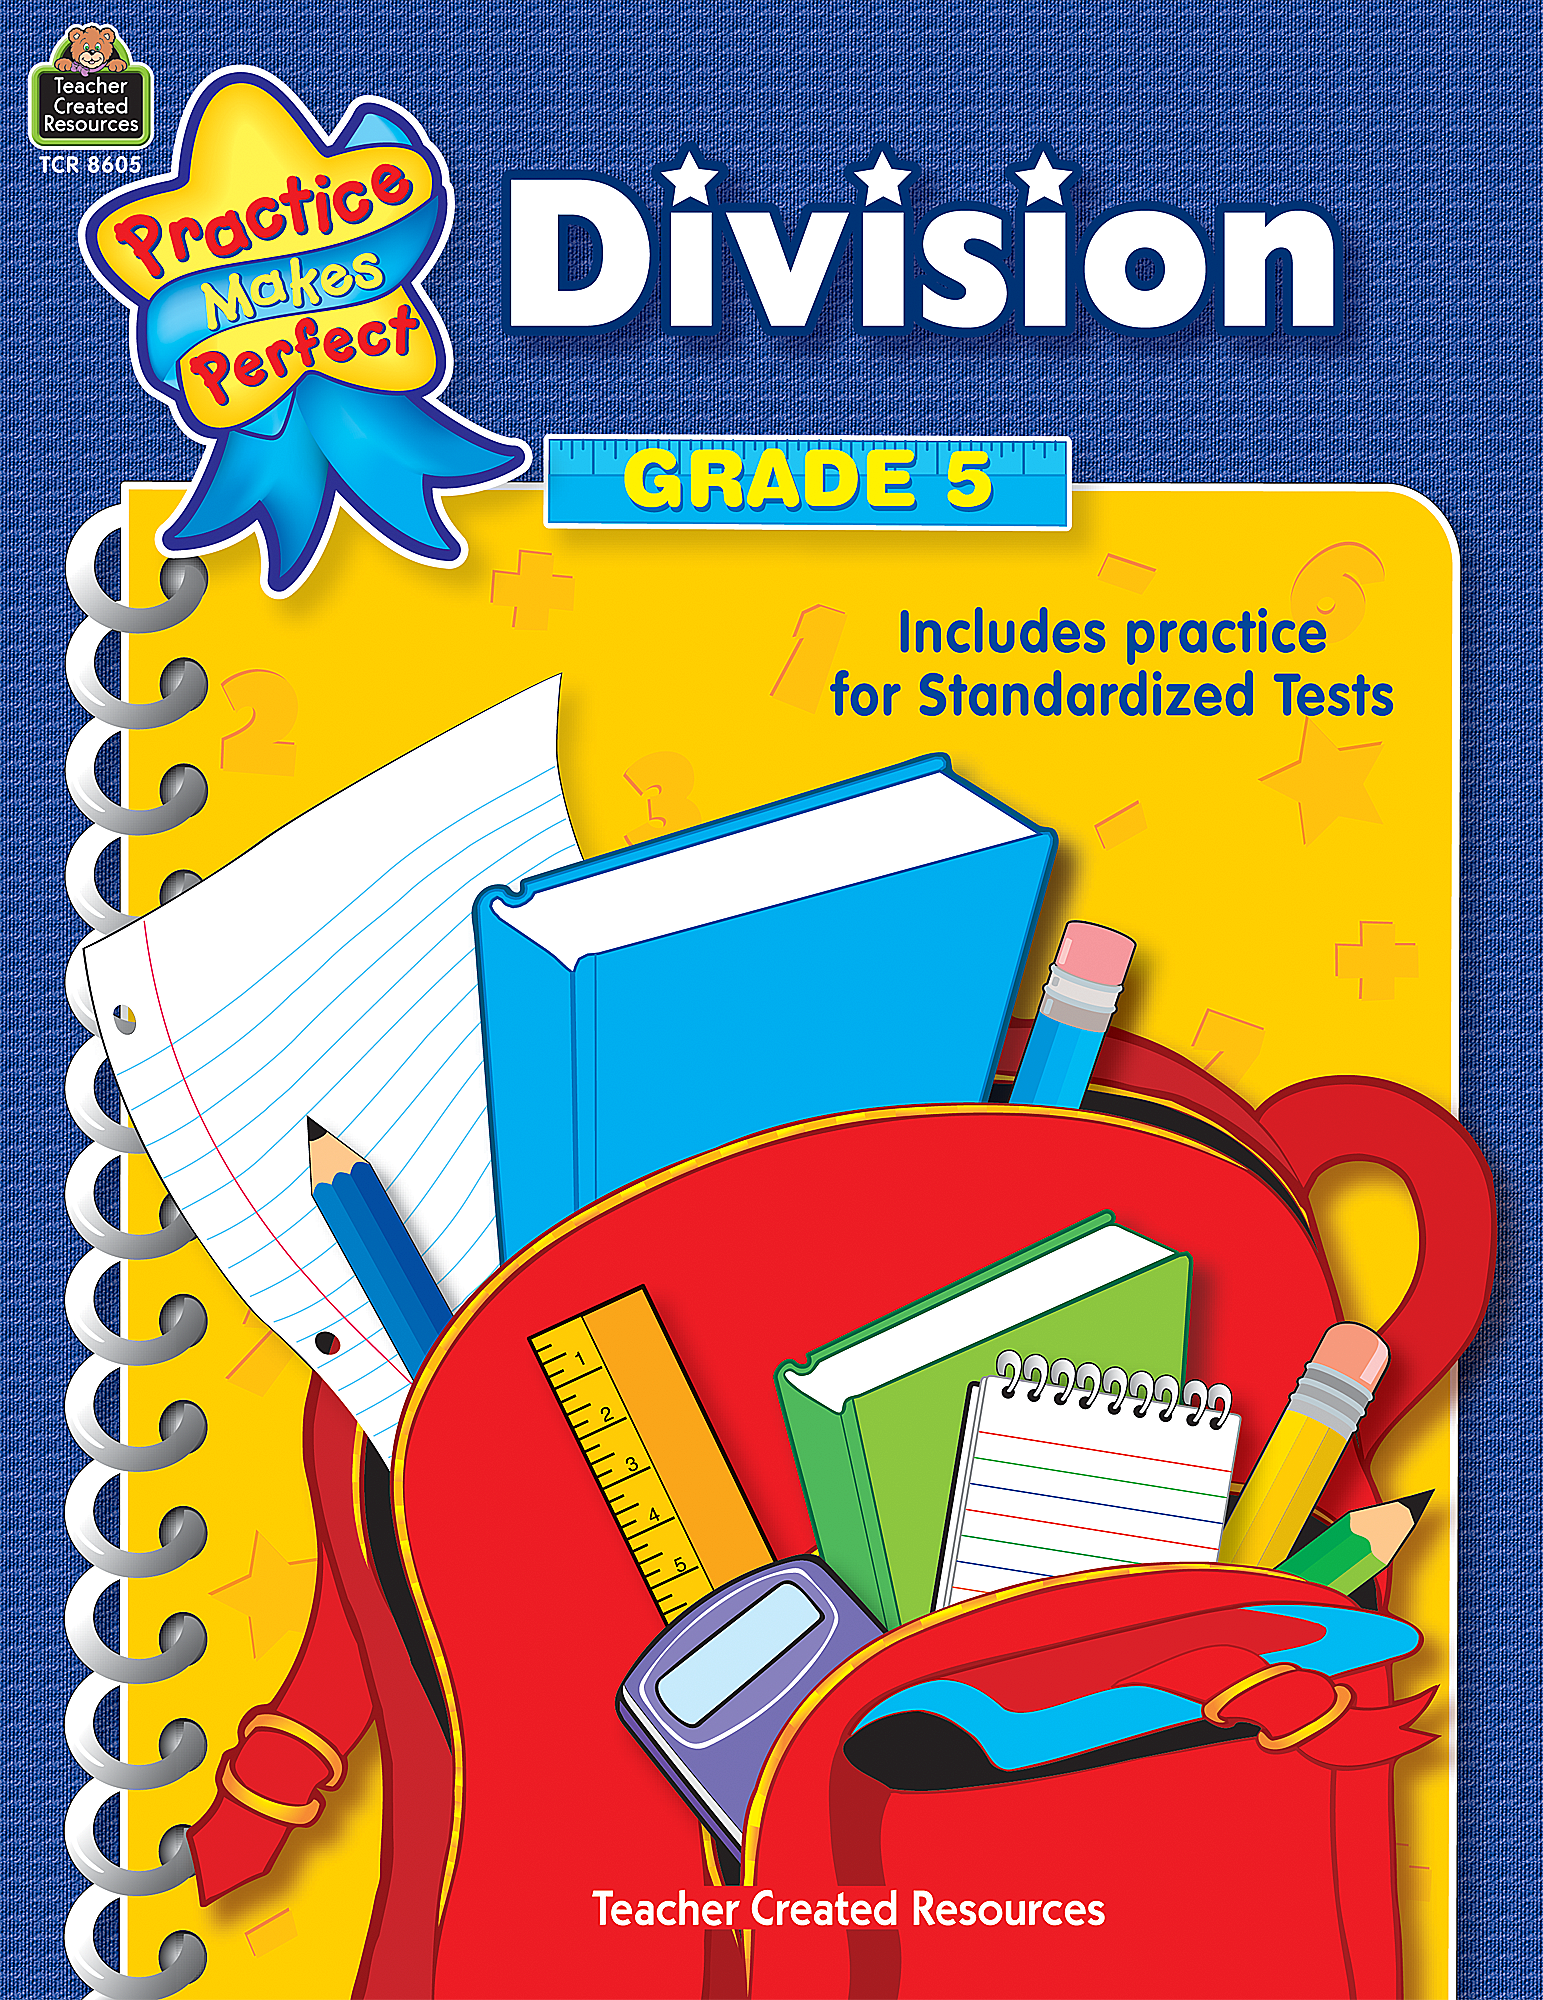 Division Grade 5 - TCR8605 | Teacher Created Resources